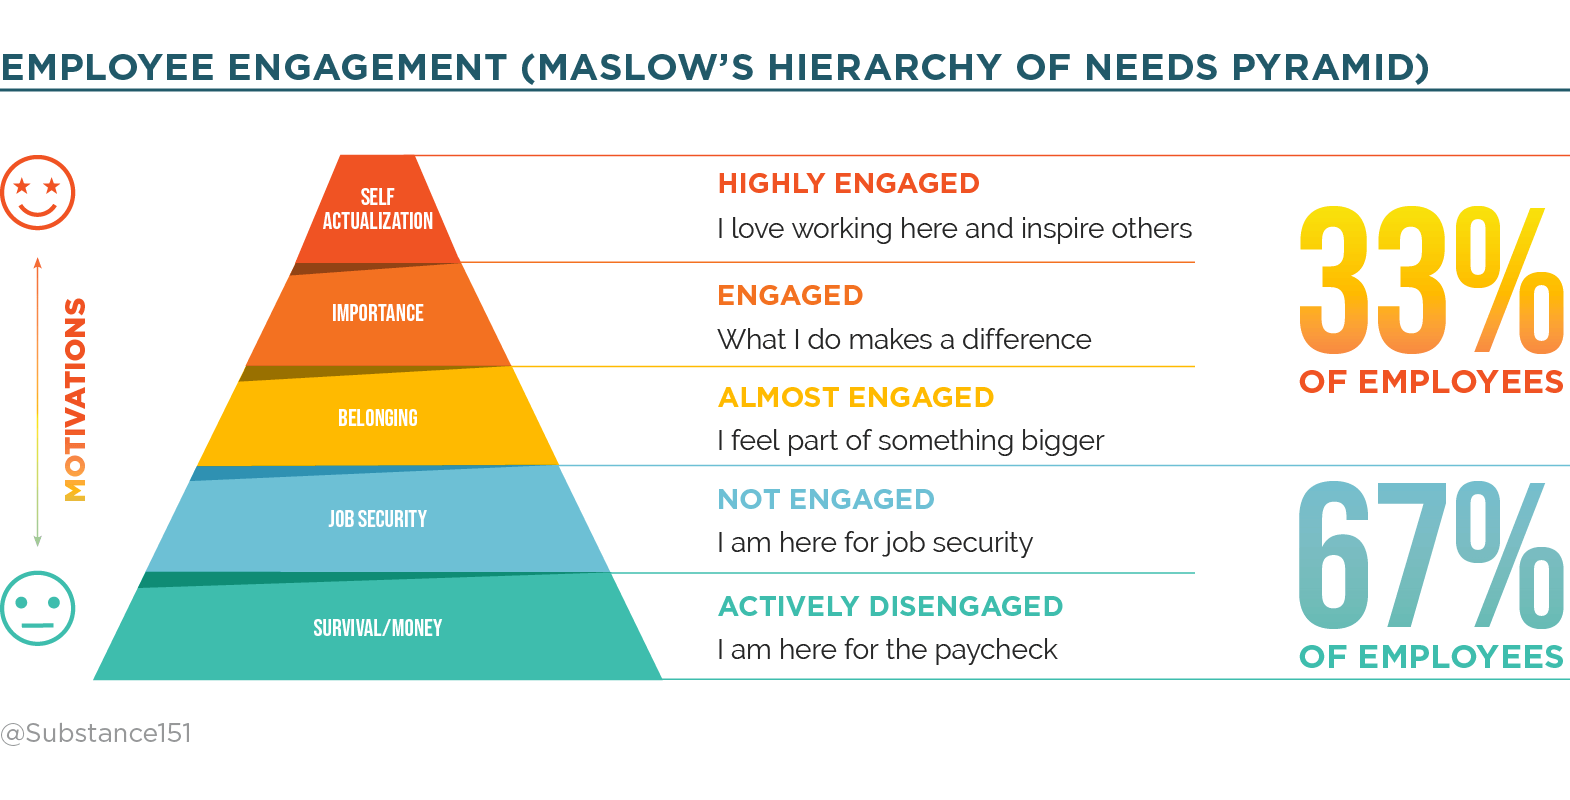 Employee Engagement Infographic Maslow's Hierarchy of Needs